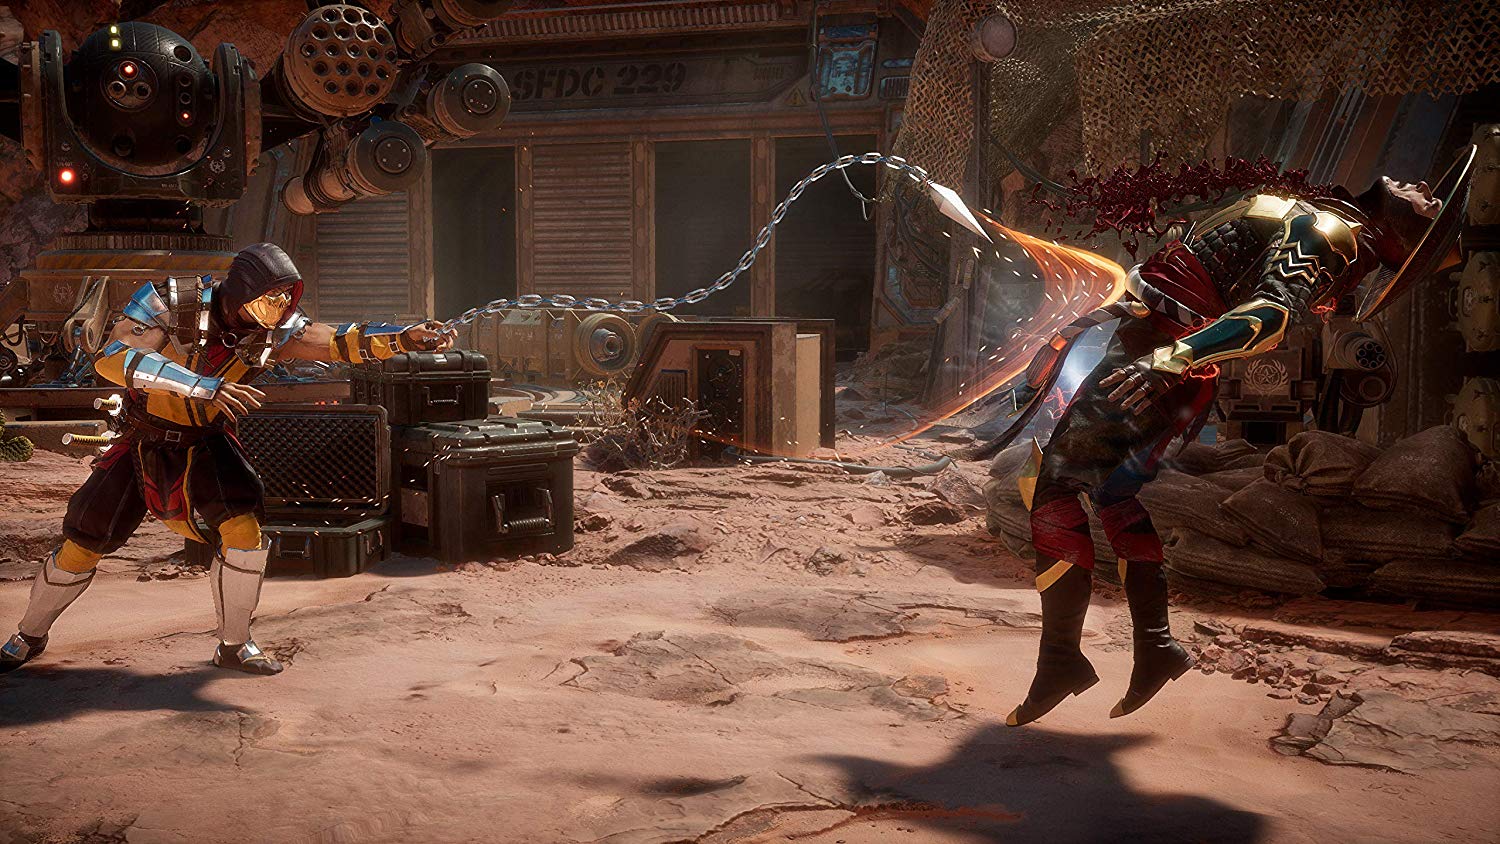 A screenshot from Mortal Kombat 11, showing Scorpion performing a chain grab on Raiden.